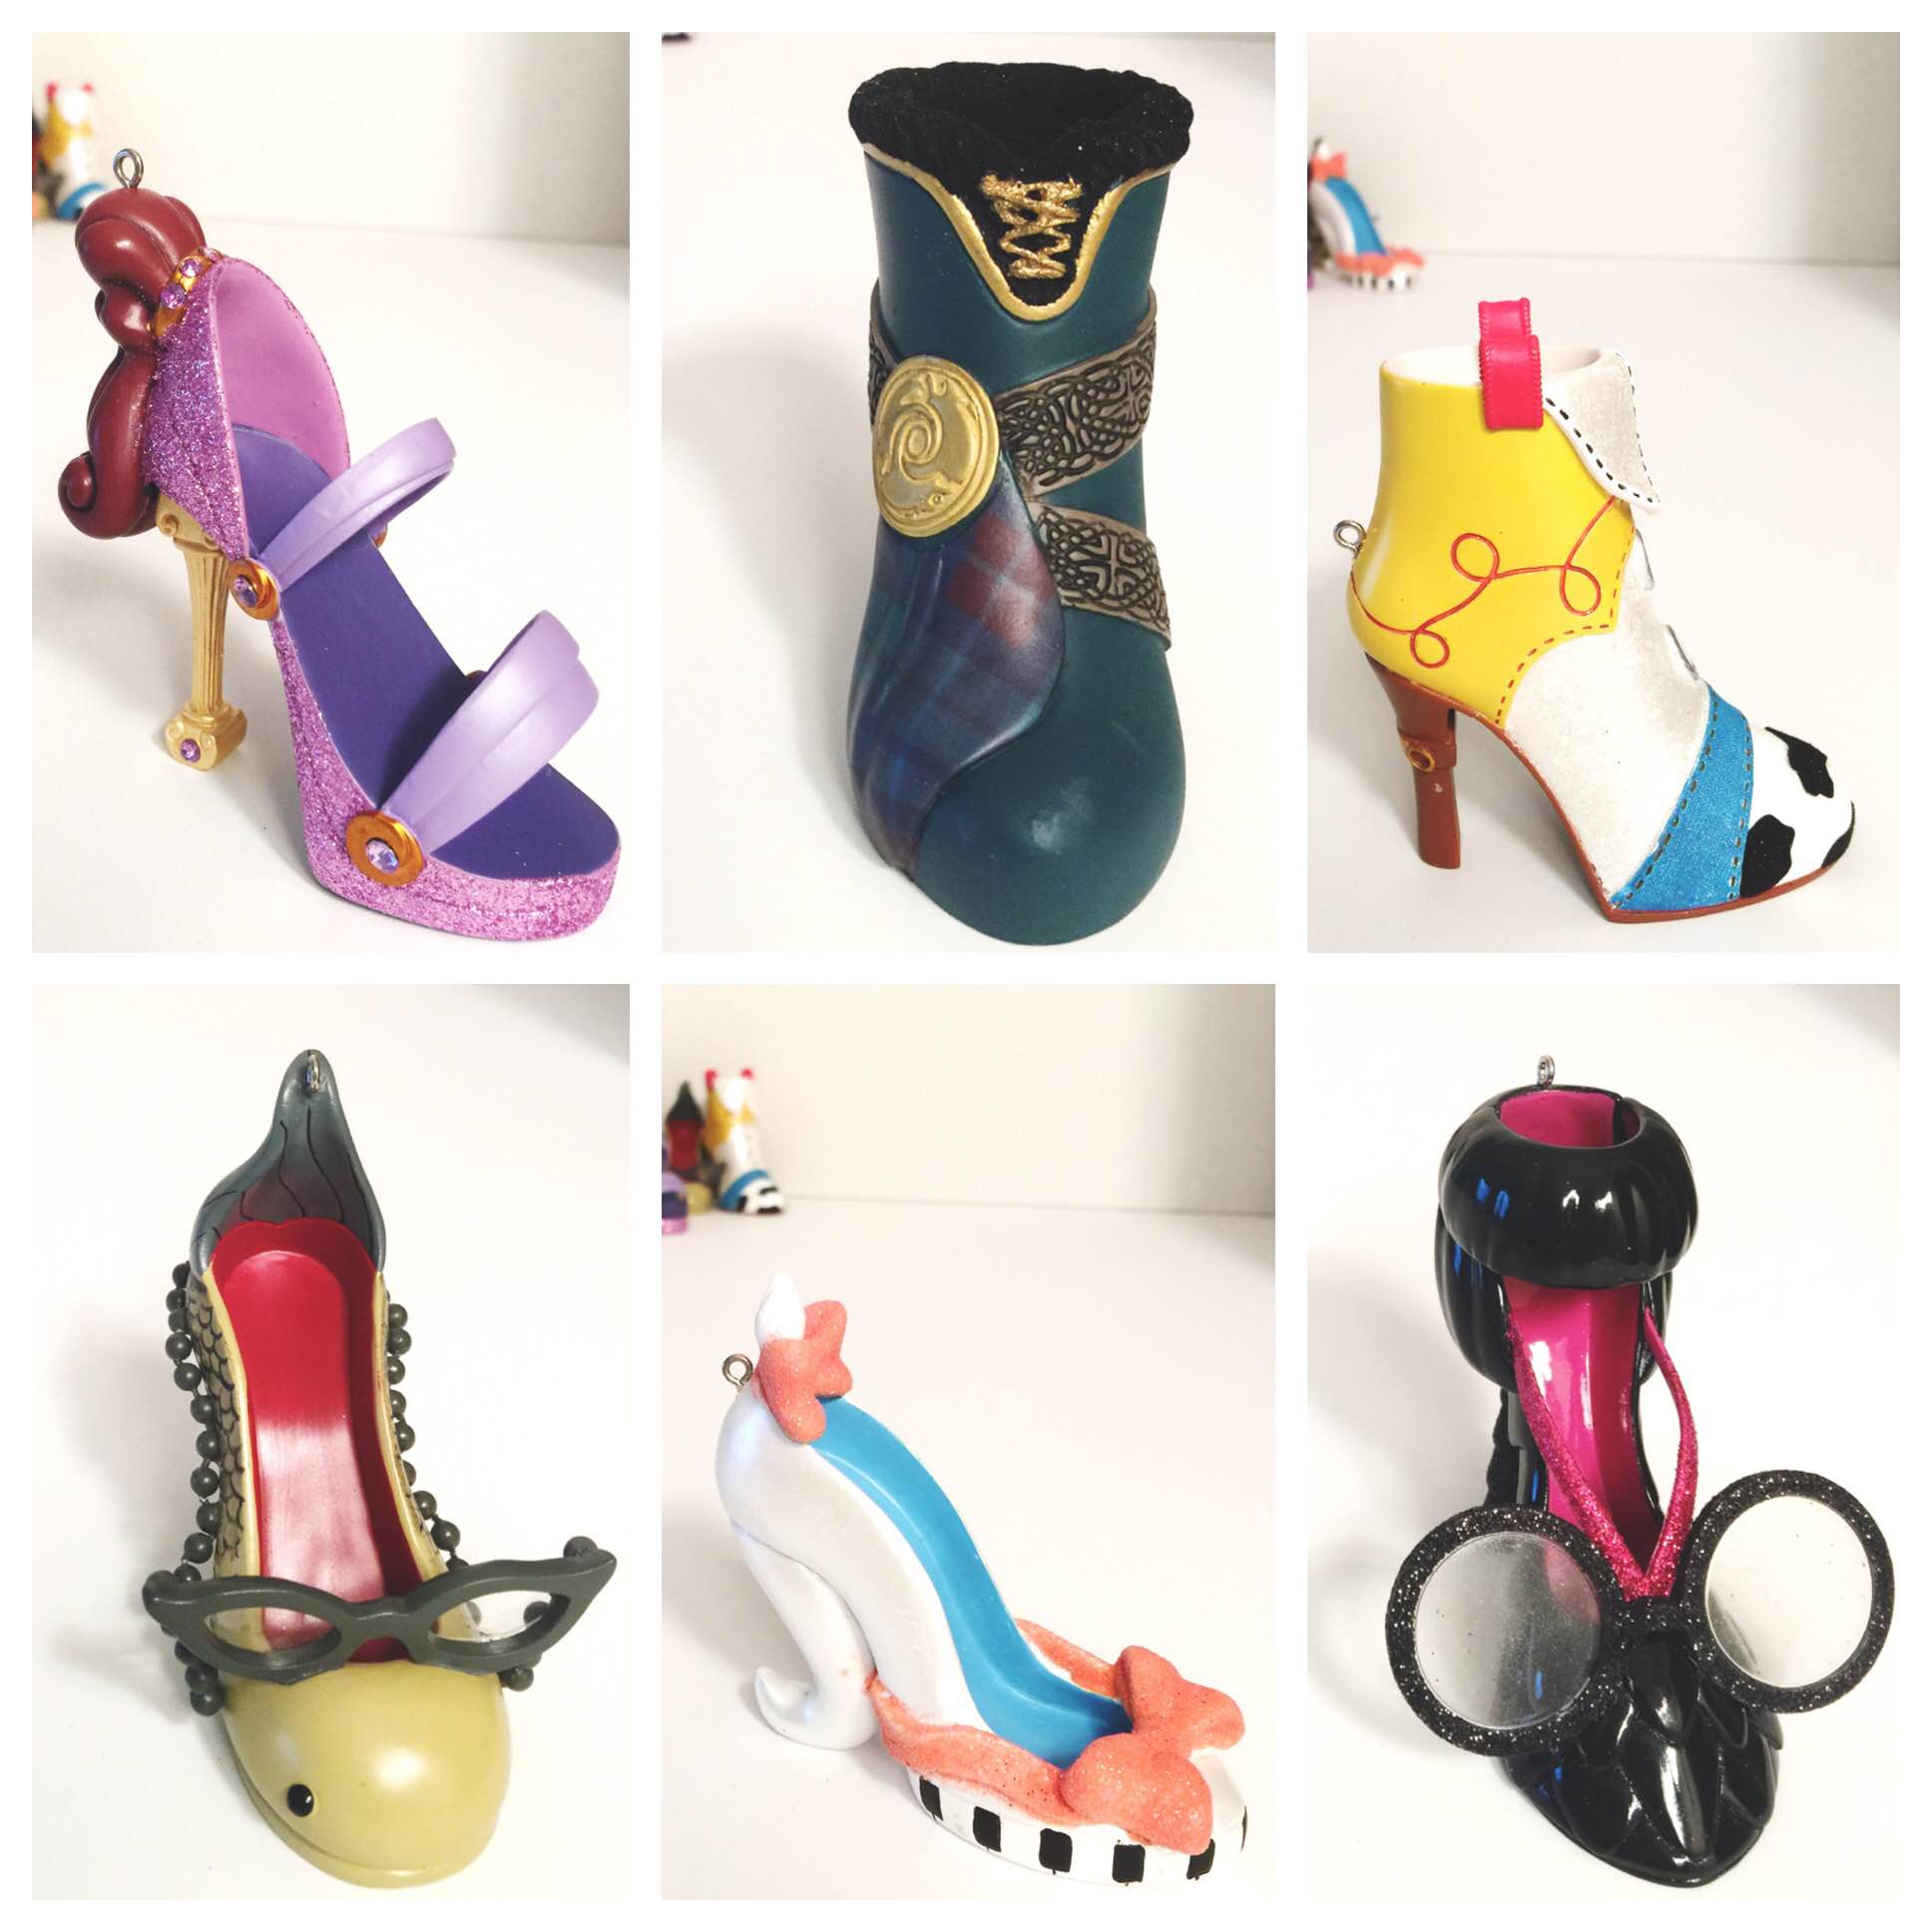 7 New Disney Runway Shoe Ornaments Have Arrived!